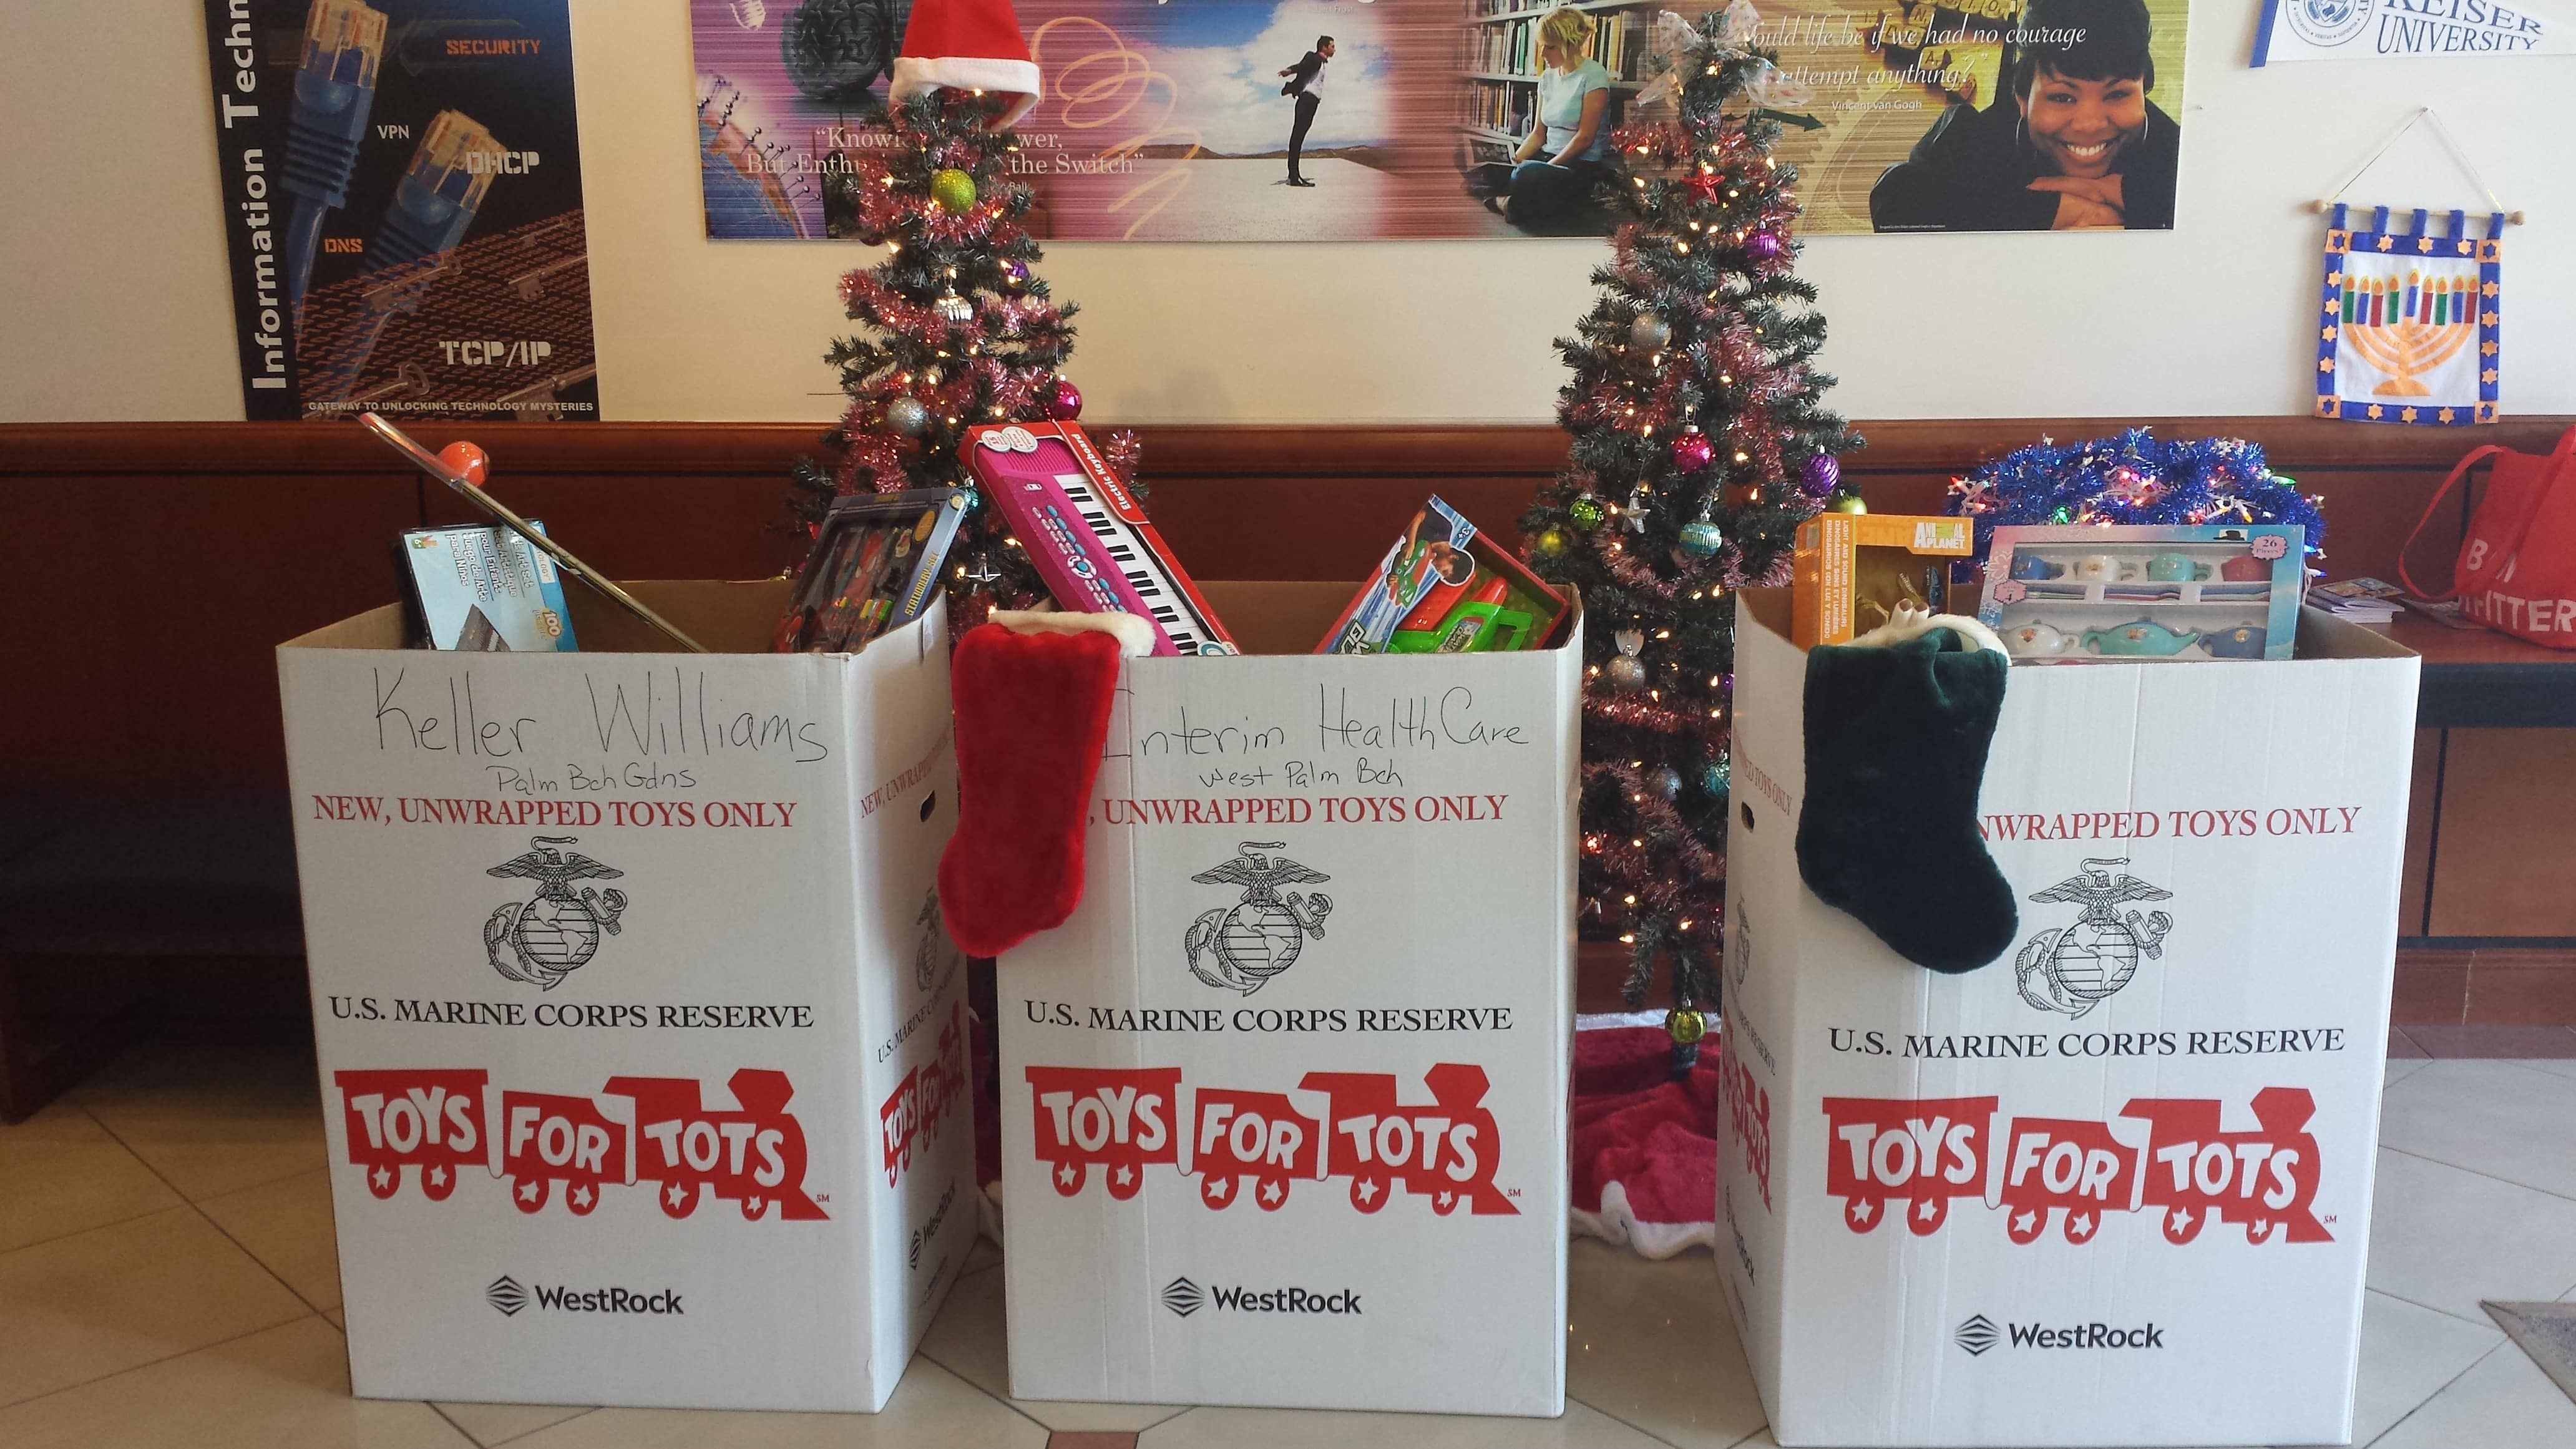 More Toys for Tots Activity from KU Campuses